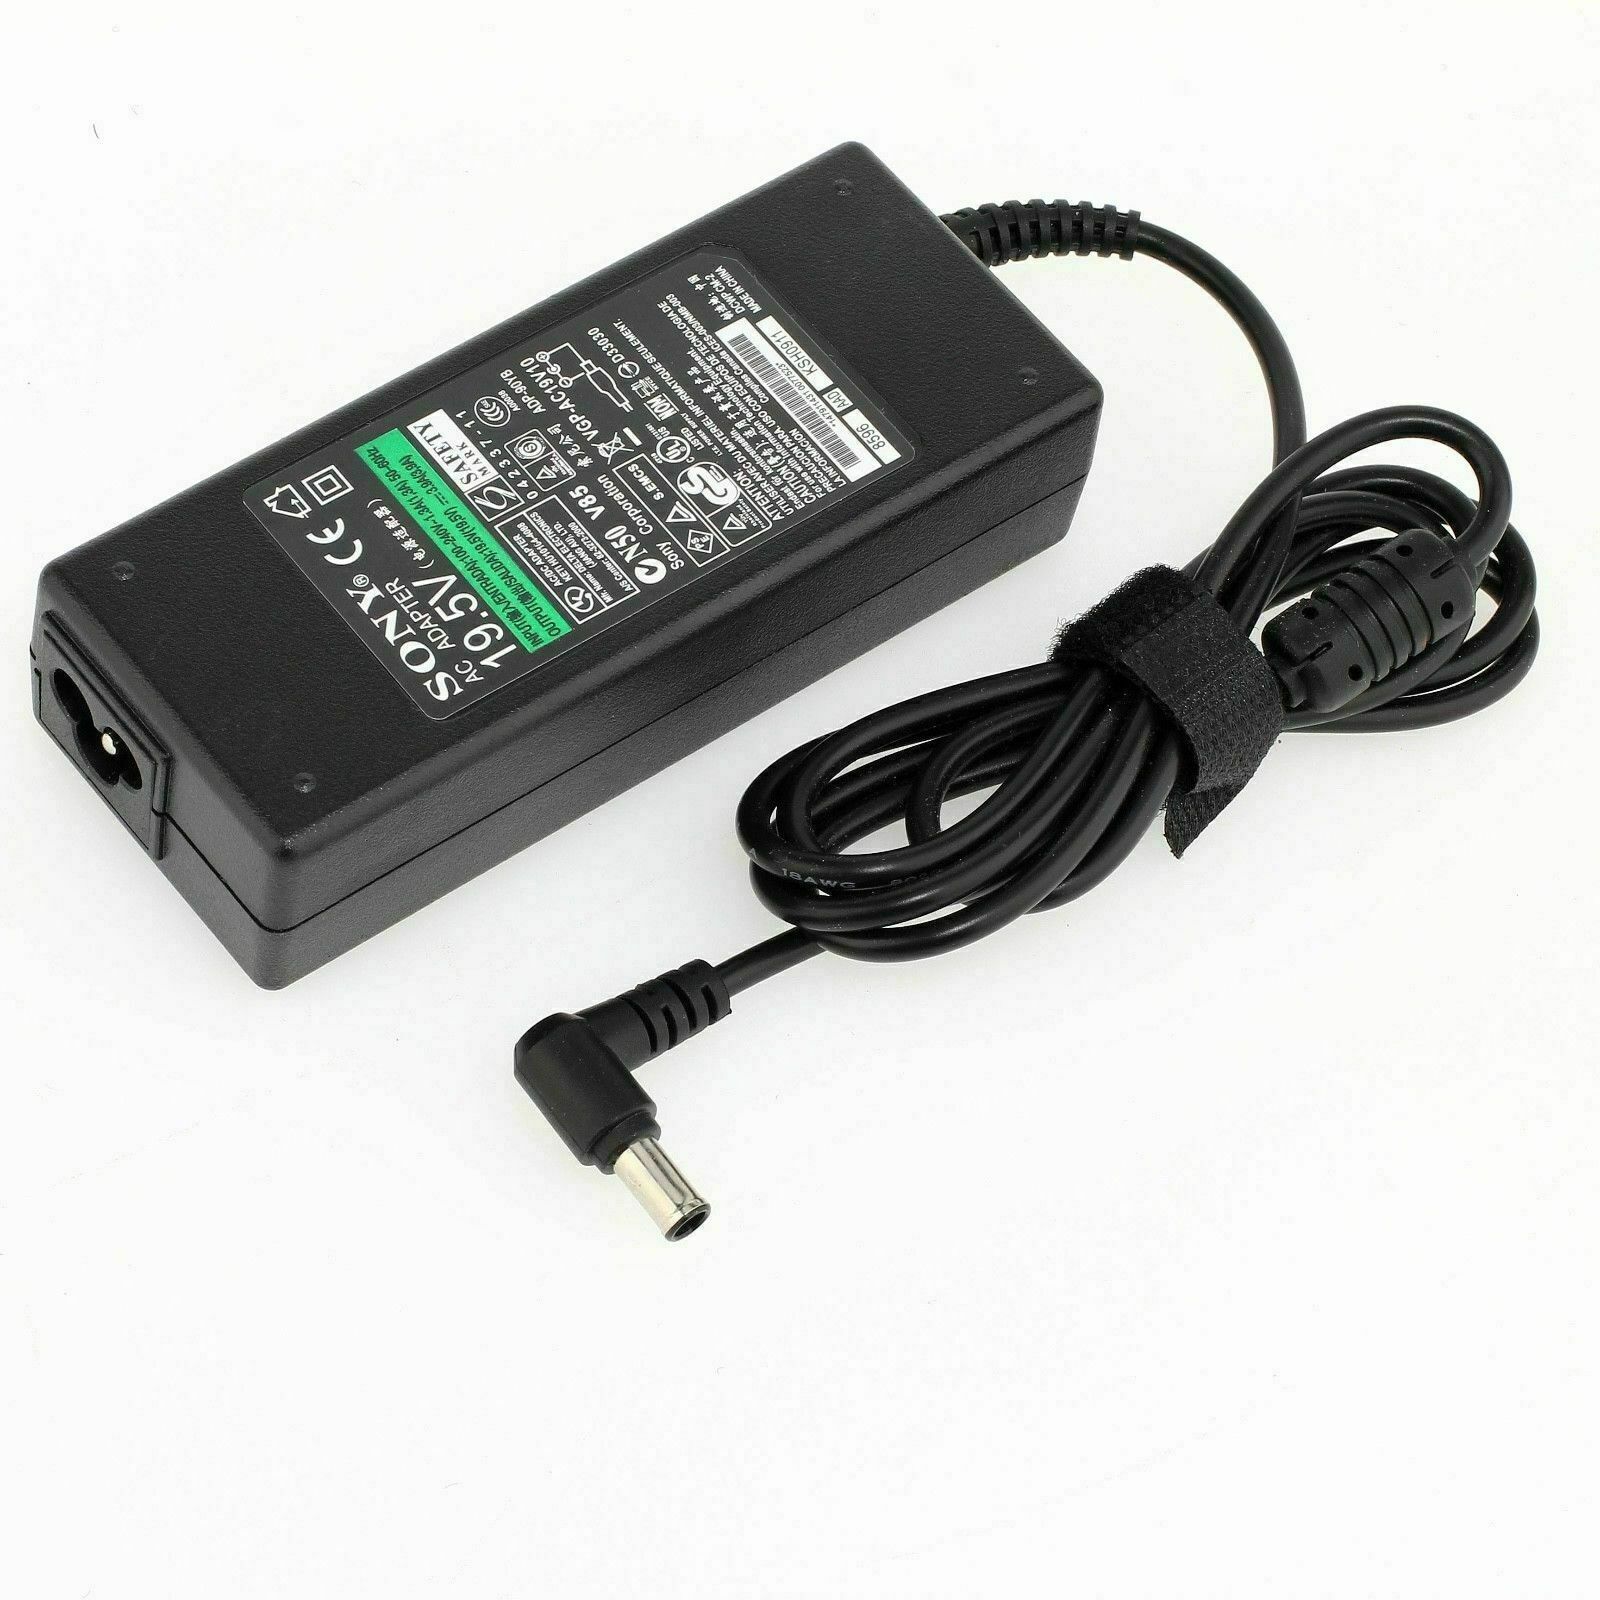 power CHARGER GENUINE LAPTOP AC ADAPTER SONY VAIO PCG-71911M VGP-AC19V48 19.5V 4.7A Compatible Brand: For Sony Type: A